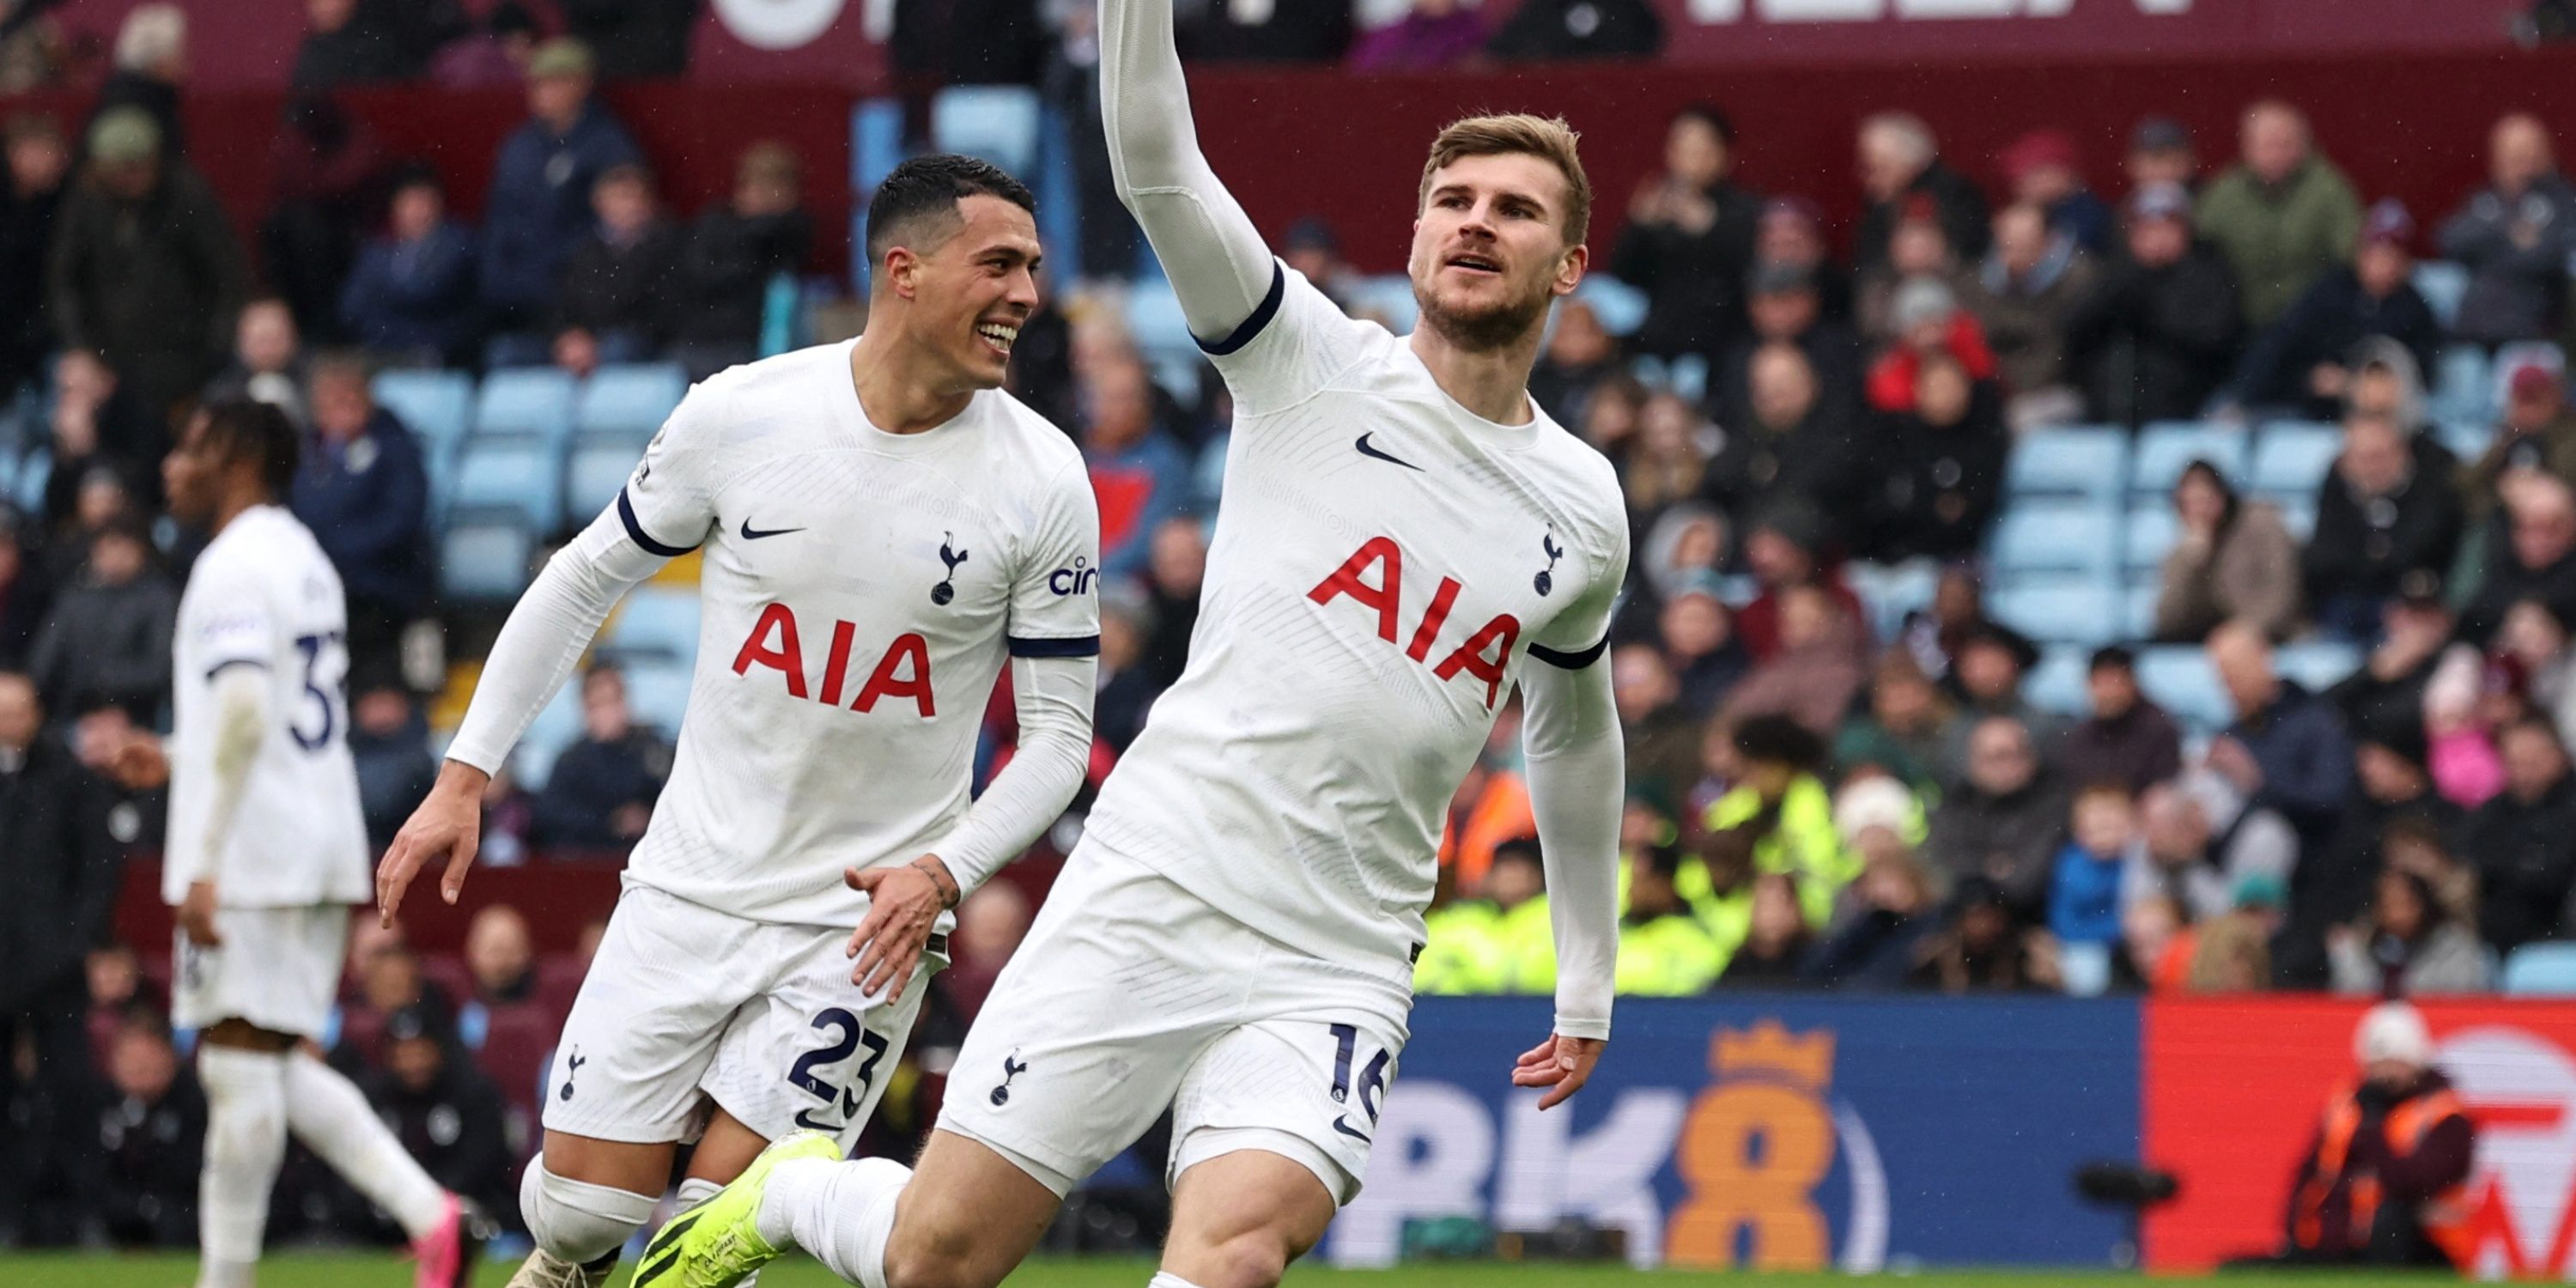 Timo Werner scores for Tottenham